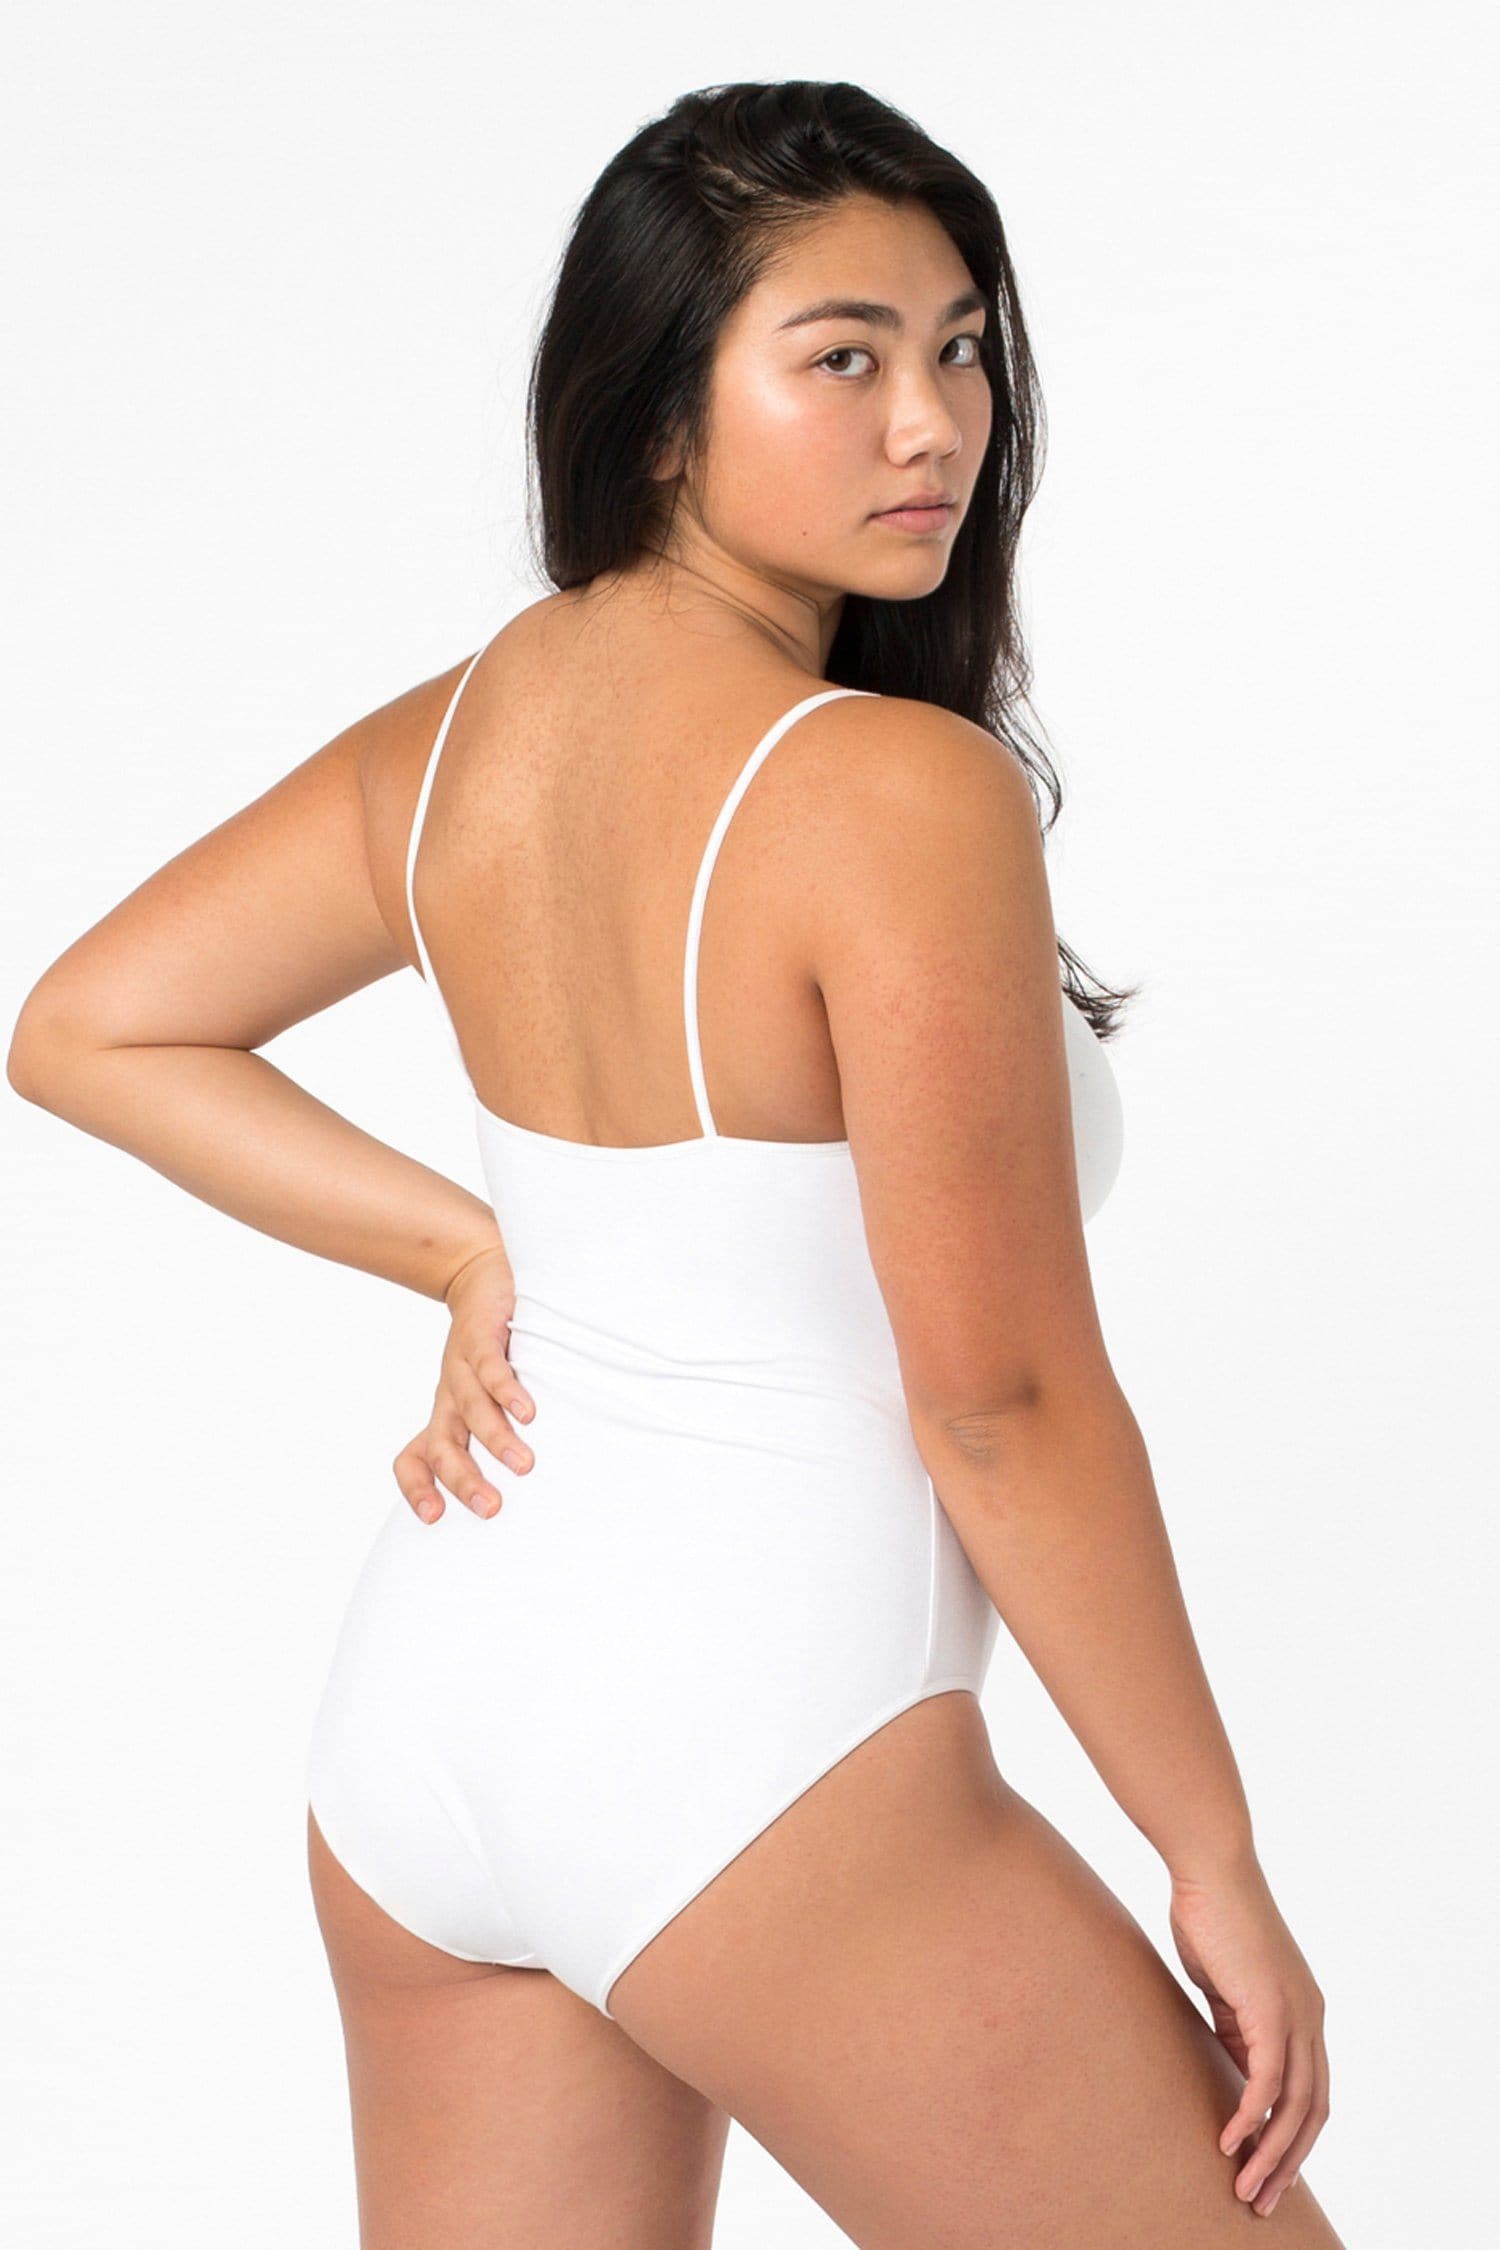 Los Angeles Apparel - The Tank Thong Bodysuit. That's Los Angeles